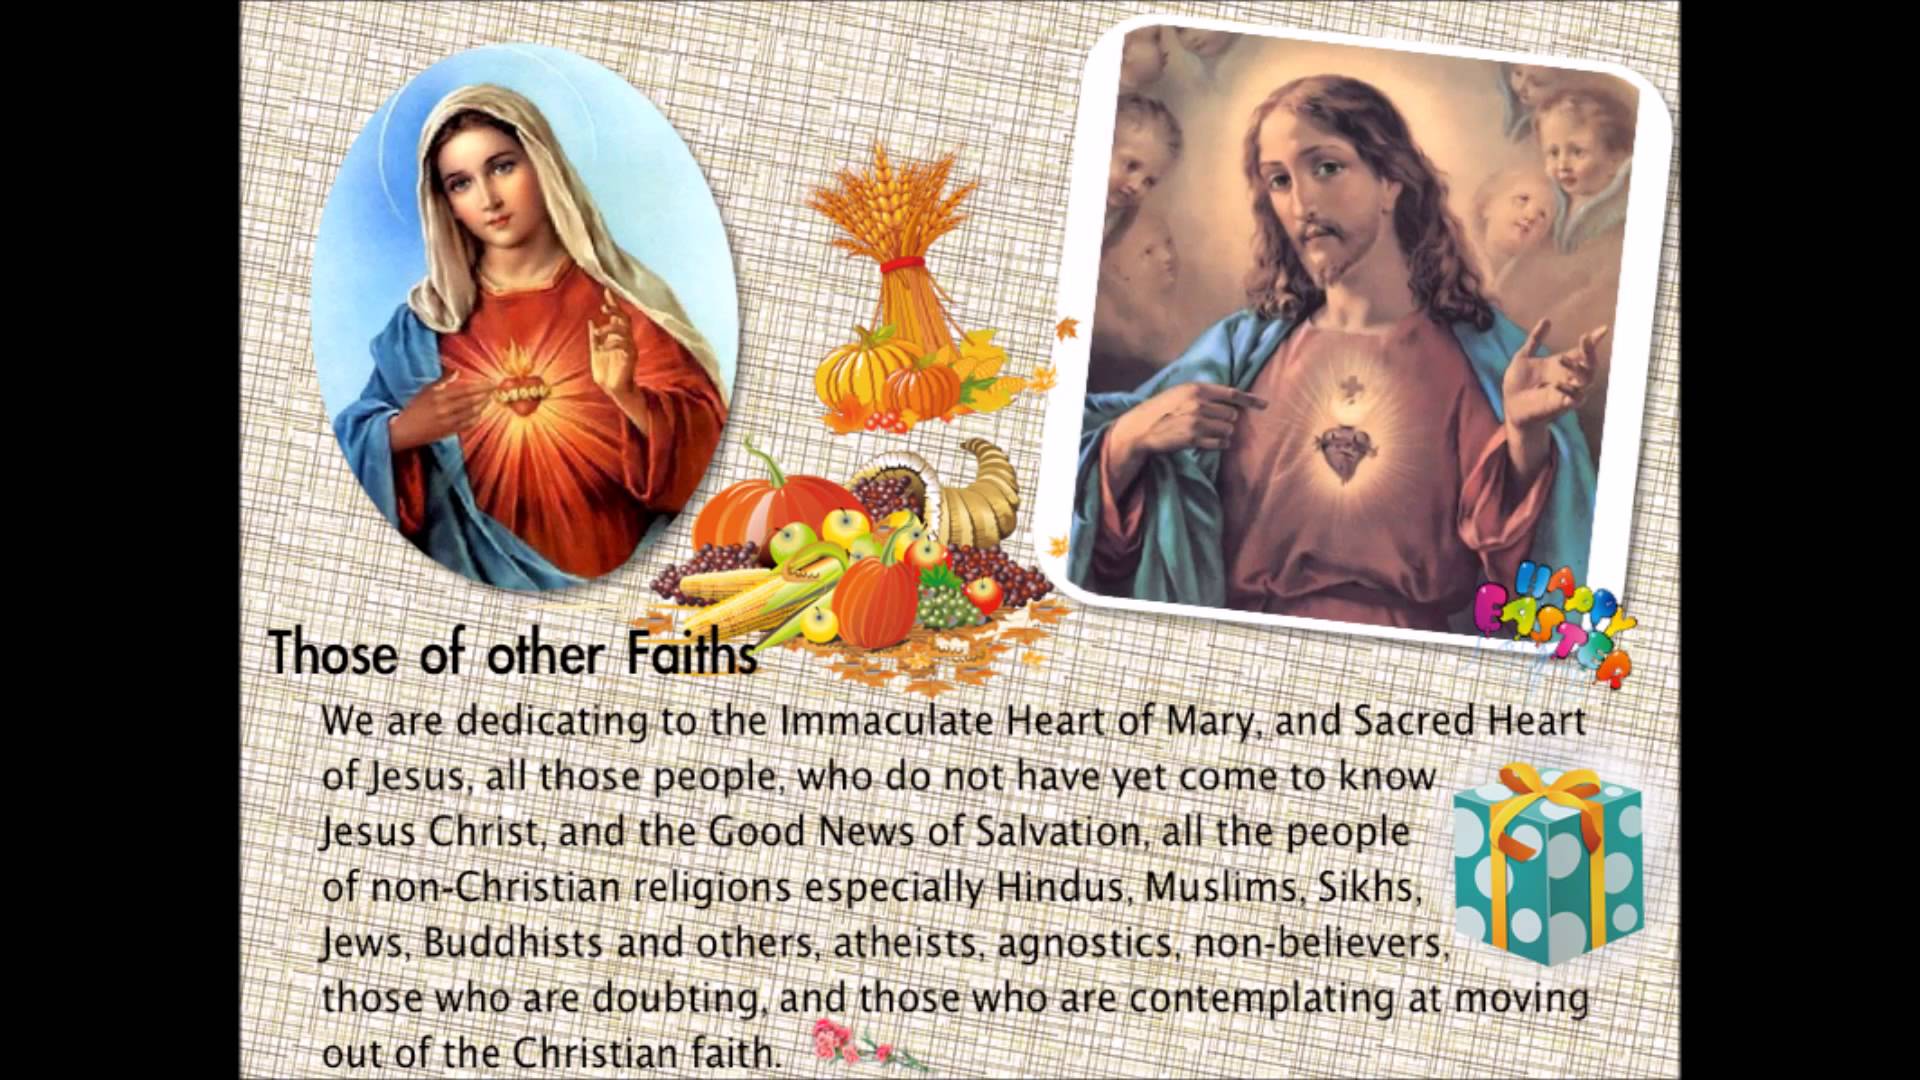 Prayer to Immaculate Heart of Mary & Sacred Heart of Jesus